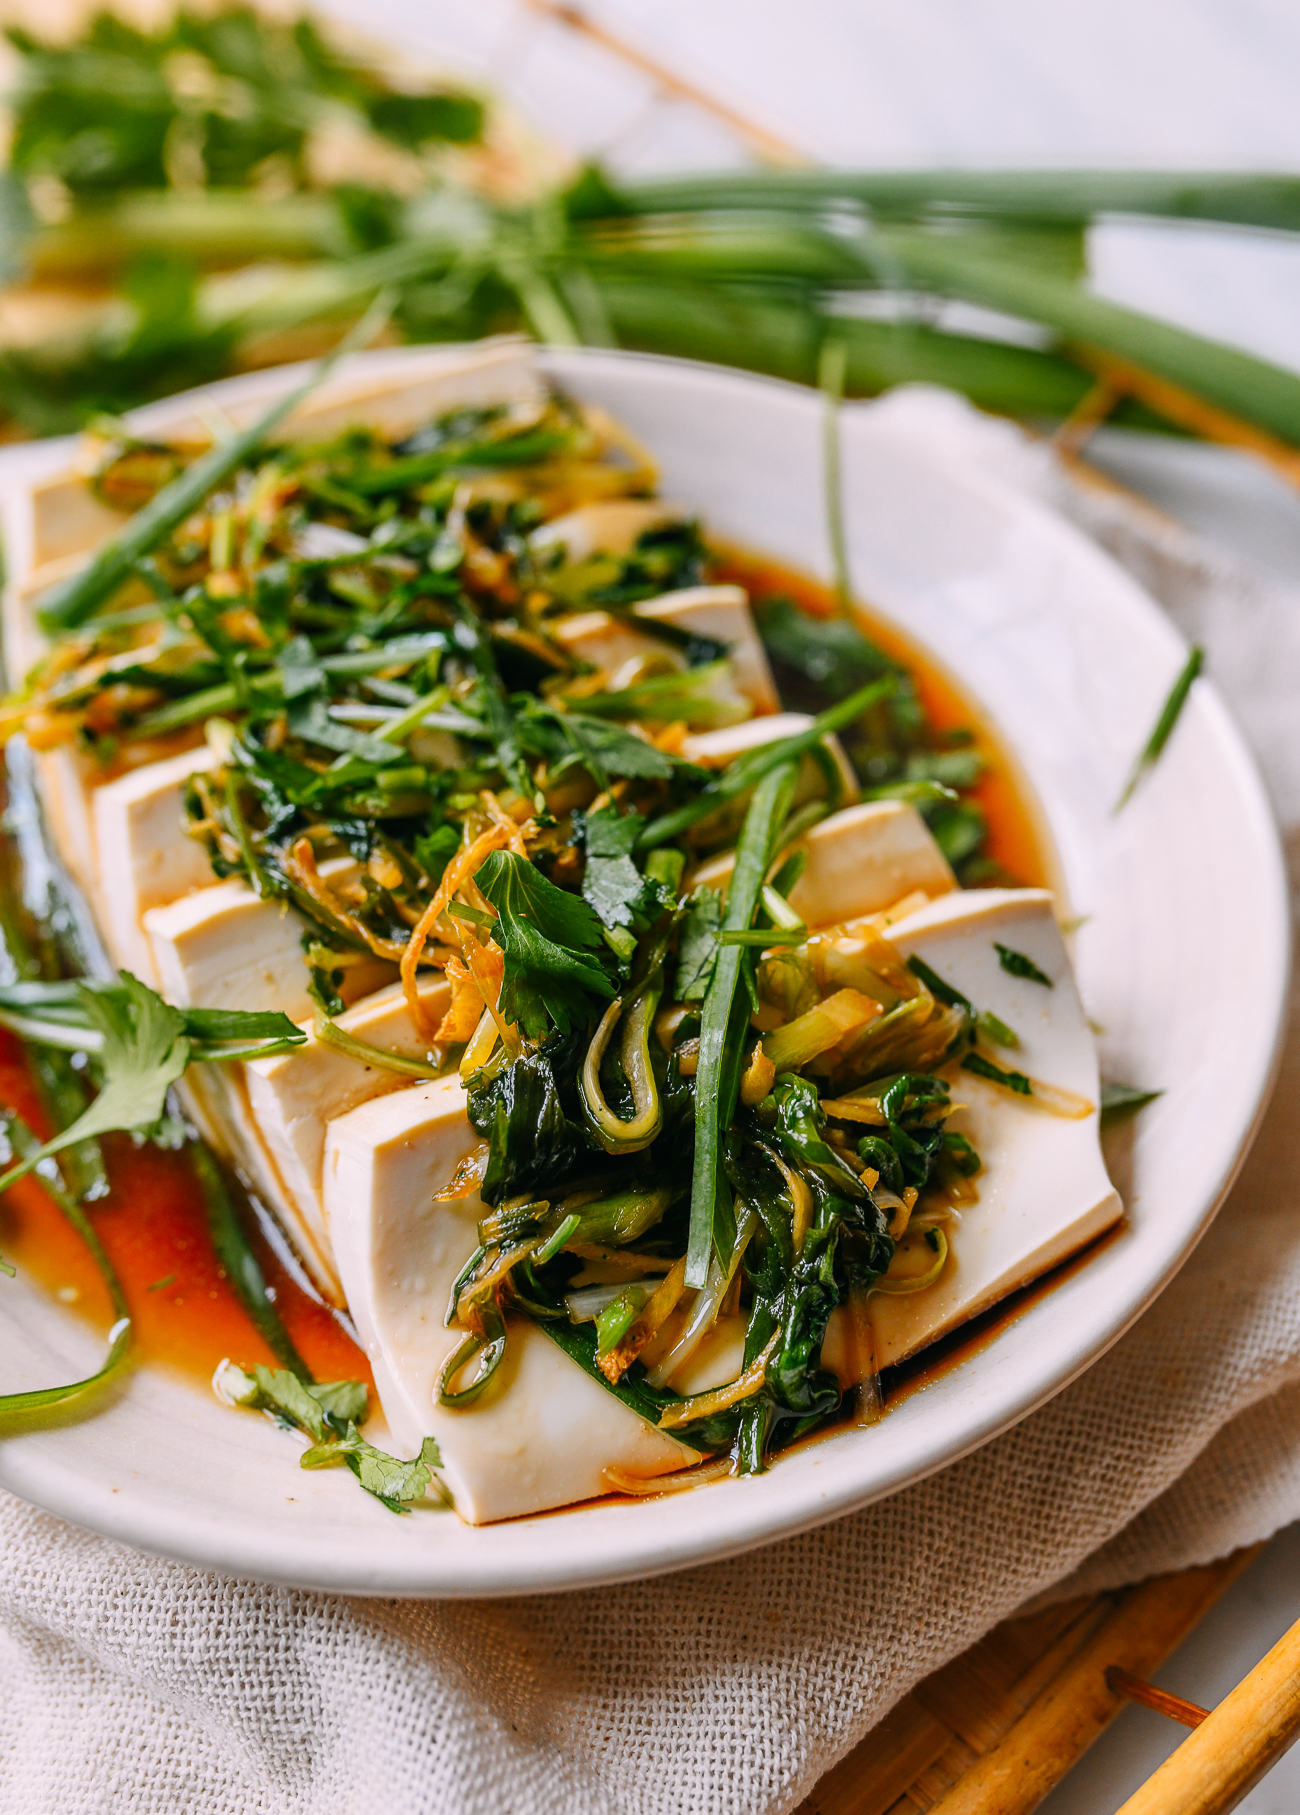 Cantonese-style steamed tofu